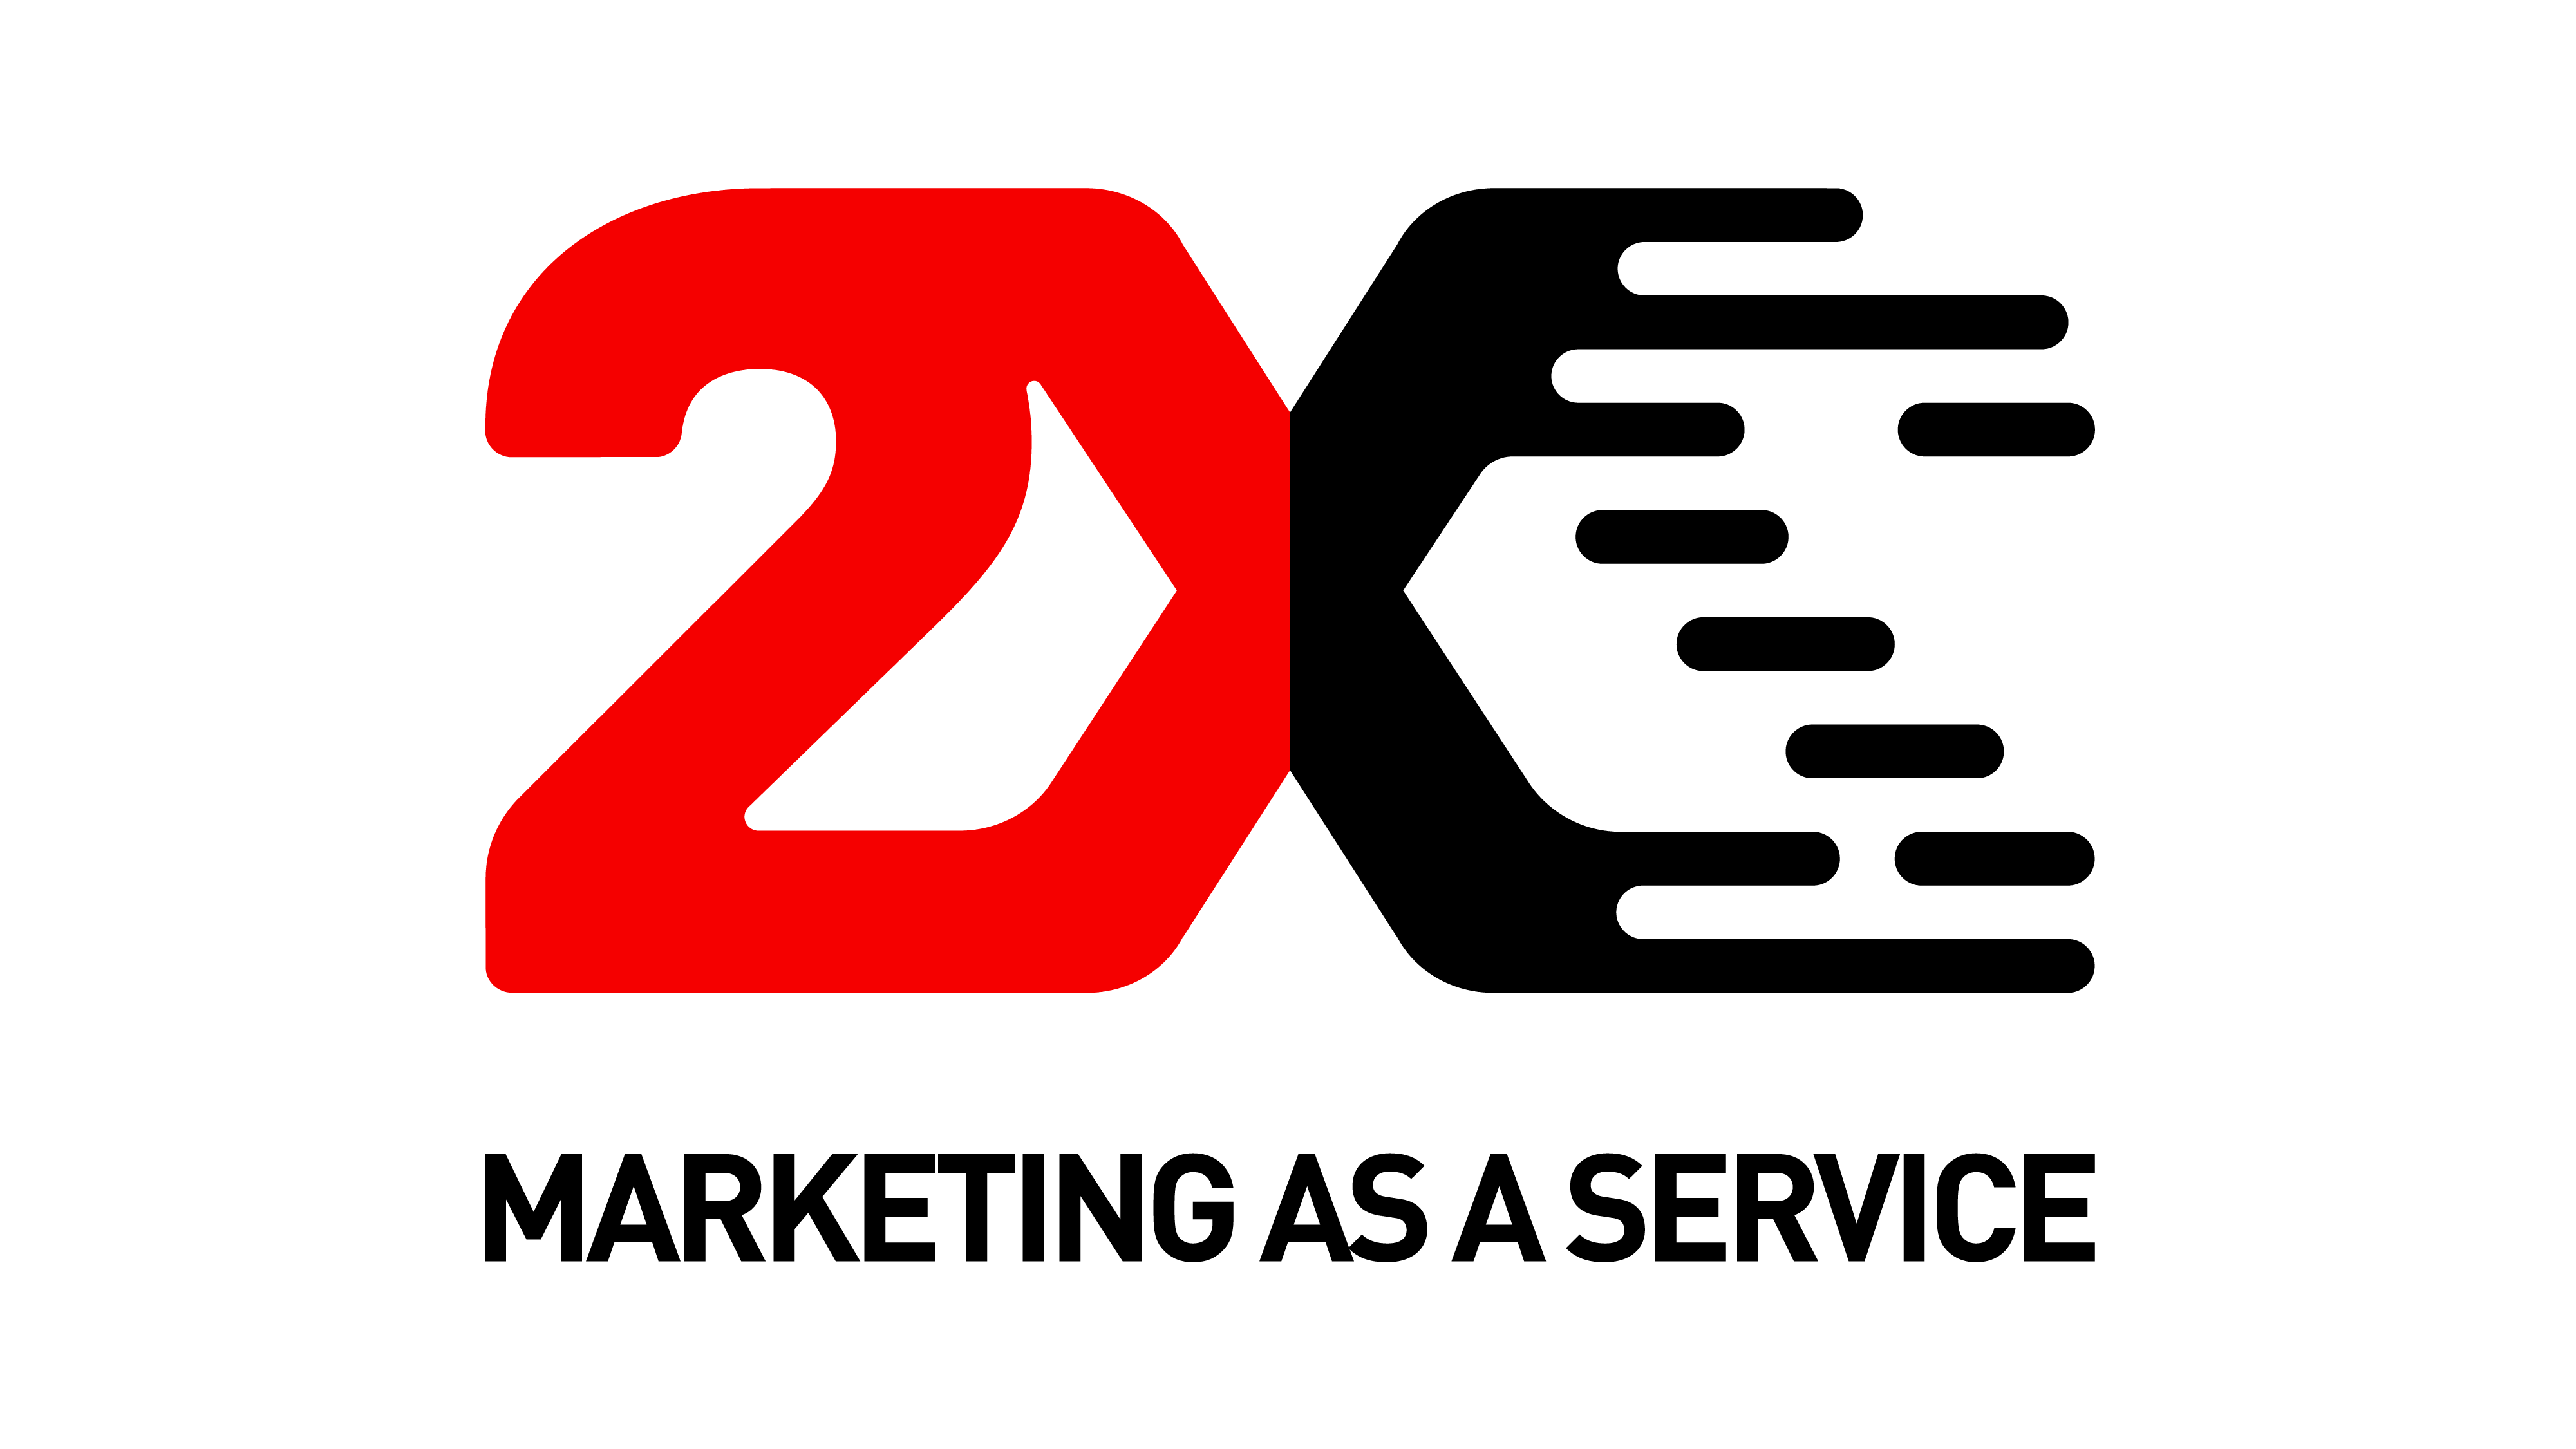 2X Welcomes Lisa Cole as the Company's First CMO, Igniting AI Innovation and Accelerating Growth - GlobeNewswire